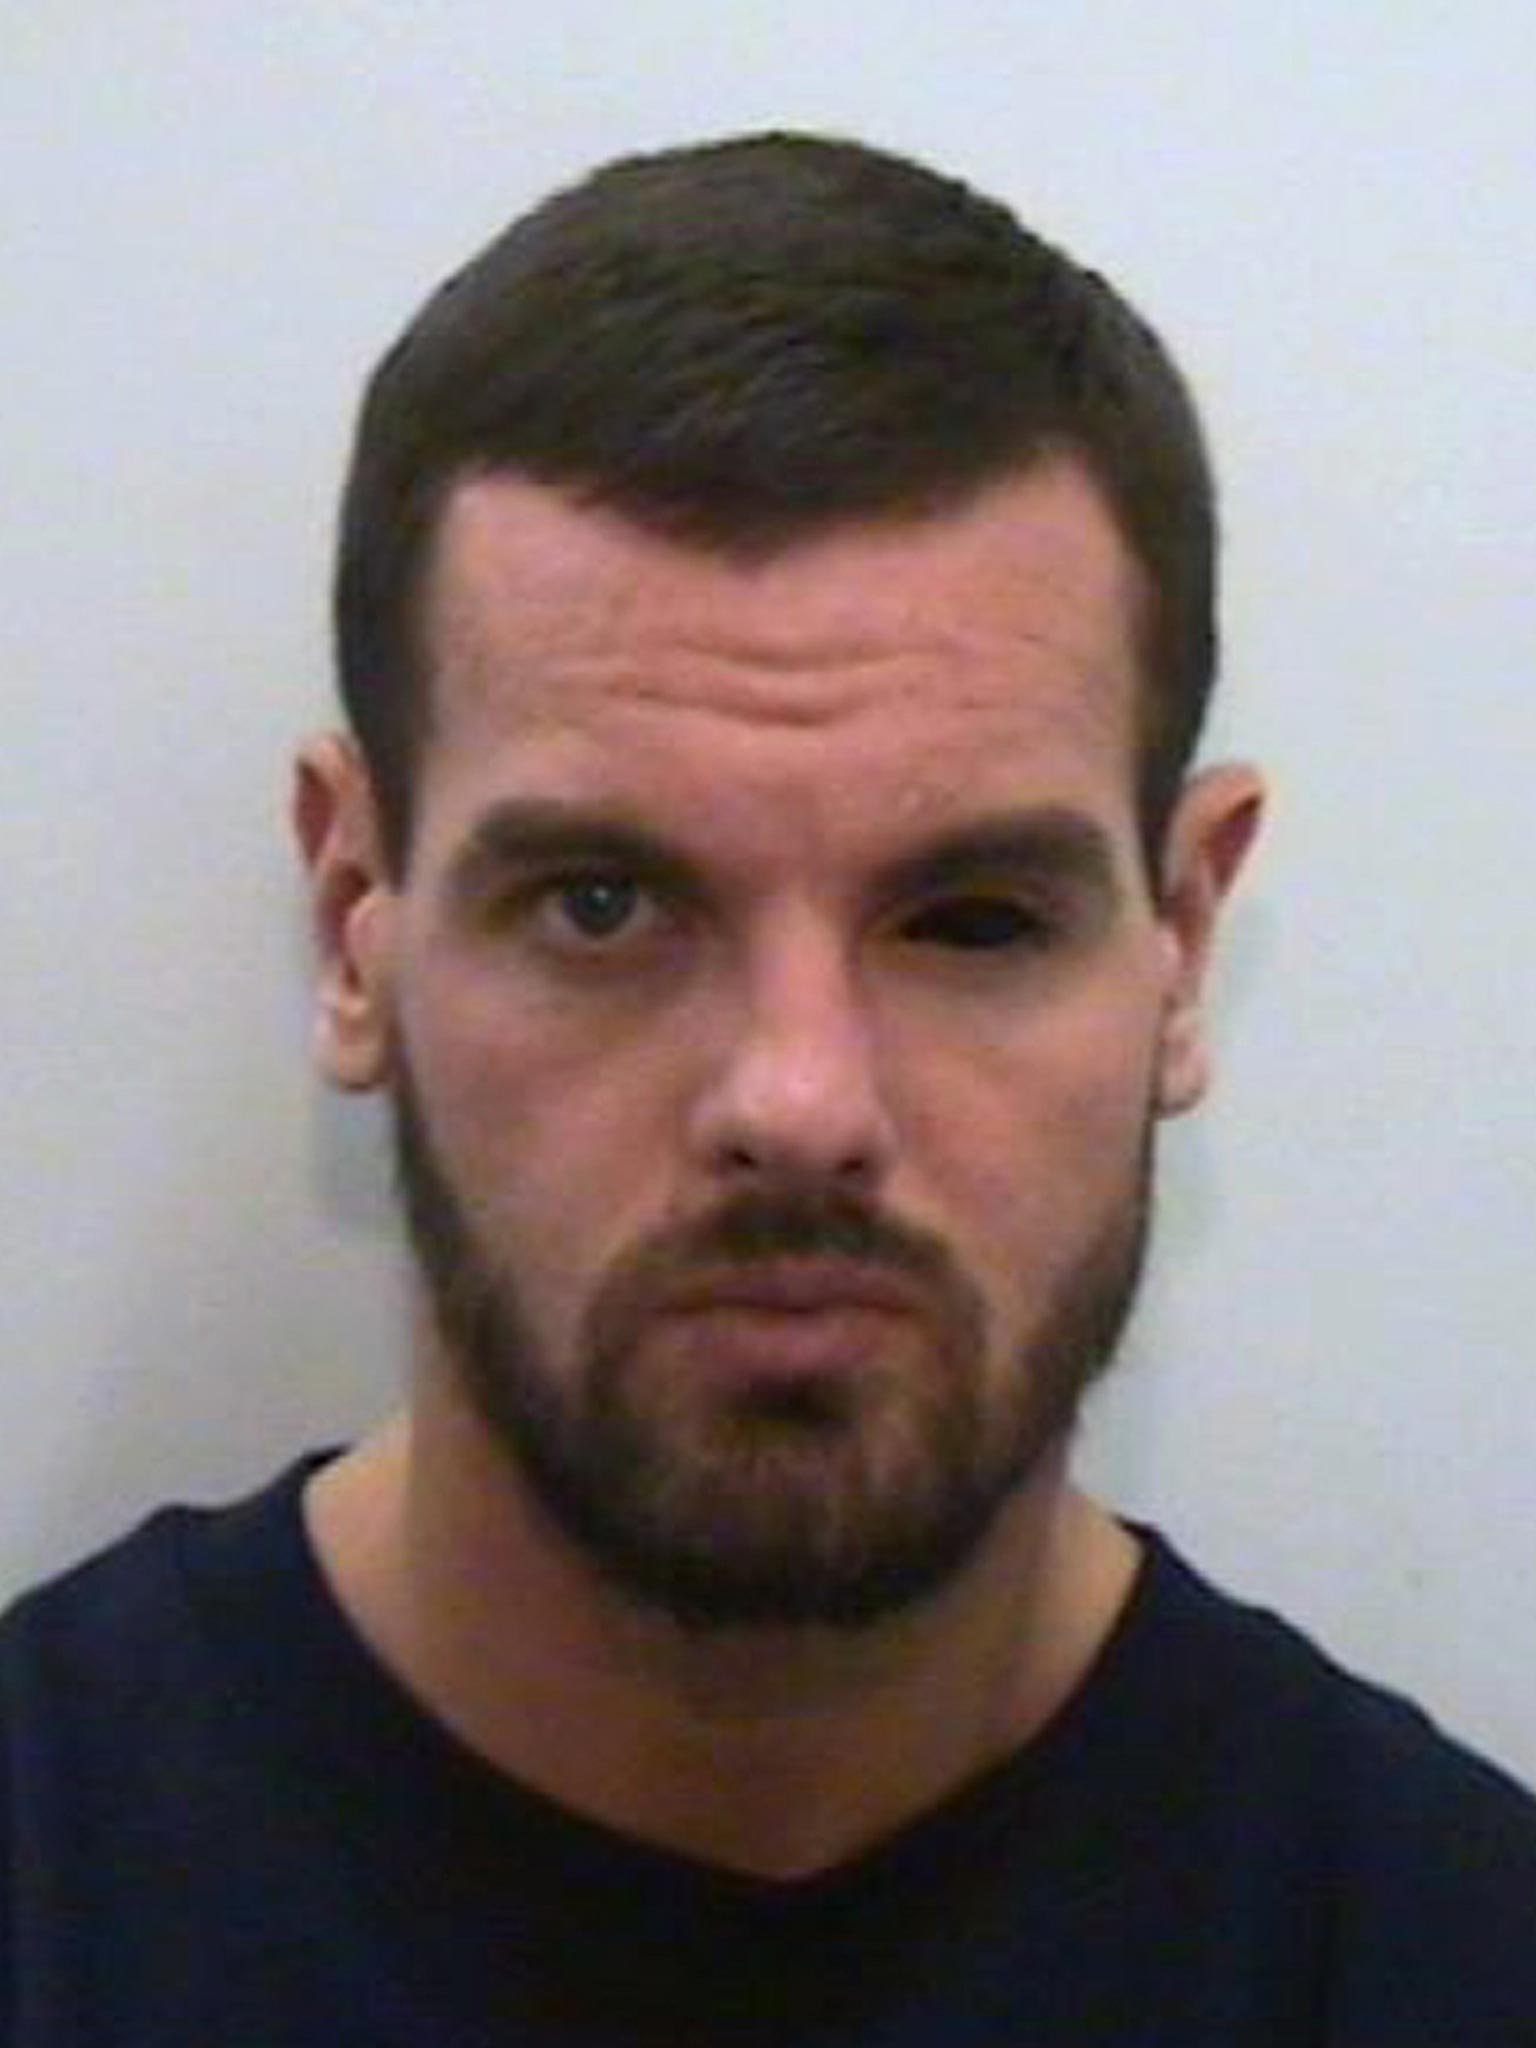 Greater Manchester Police handout photo of Dale Cregan. Three people have been charged with assisting police killerCregan and others while they were on the run from police.